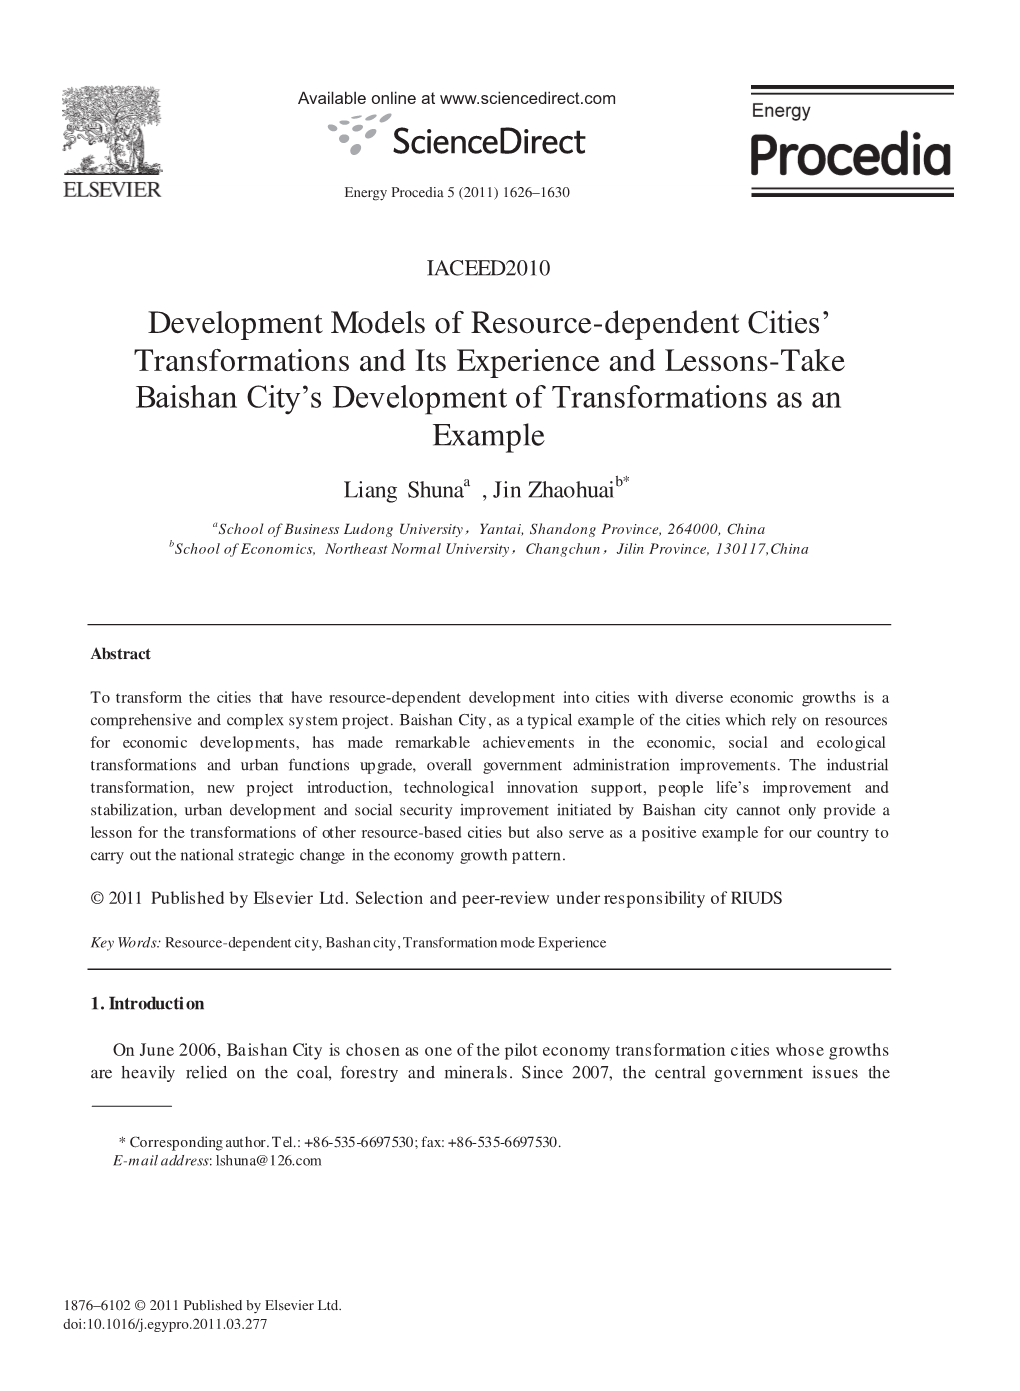 Development Models of Resource-Dependent Cities’ Transformations and Its Experience and Lessons-Take Baishan City’S Development of Transformations As an Example